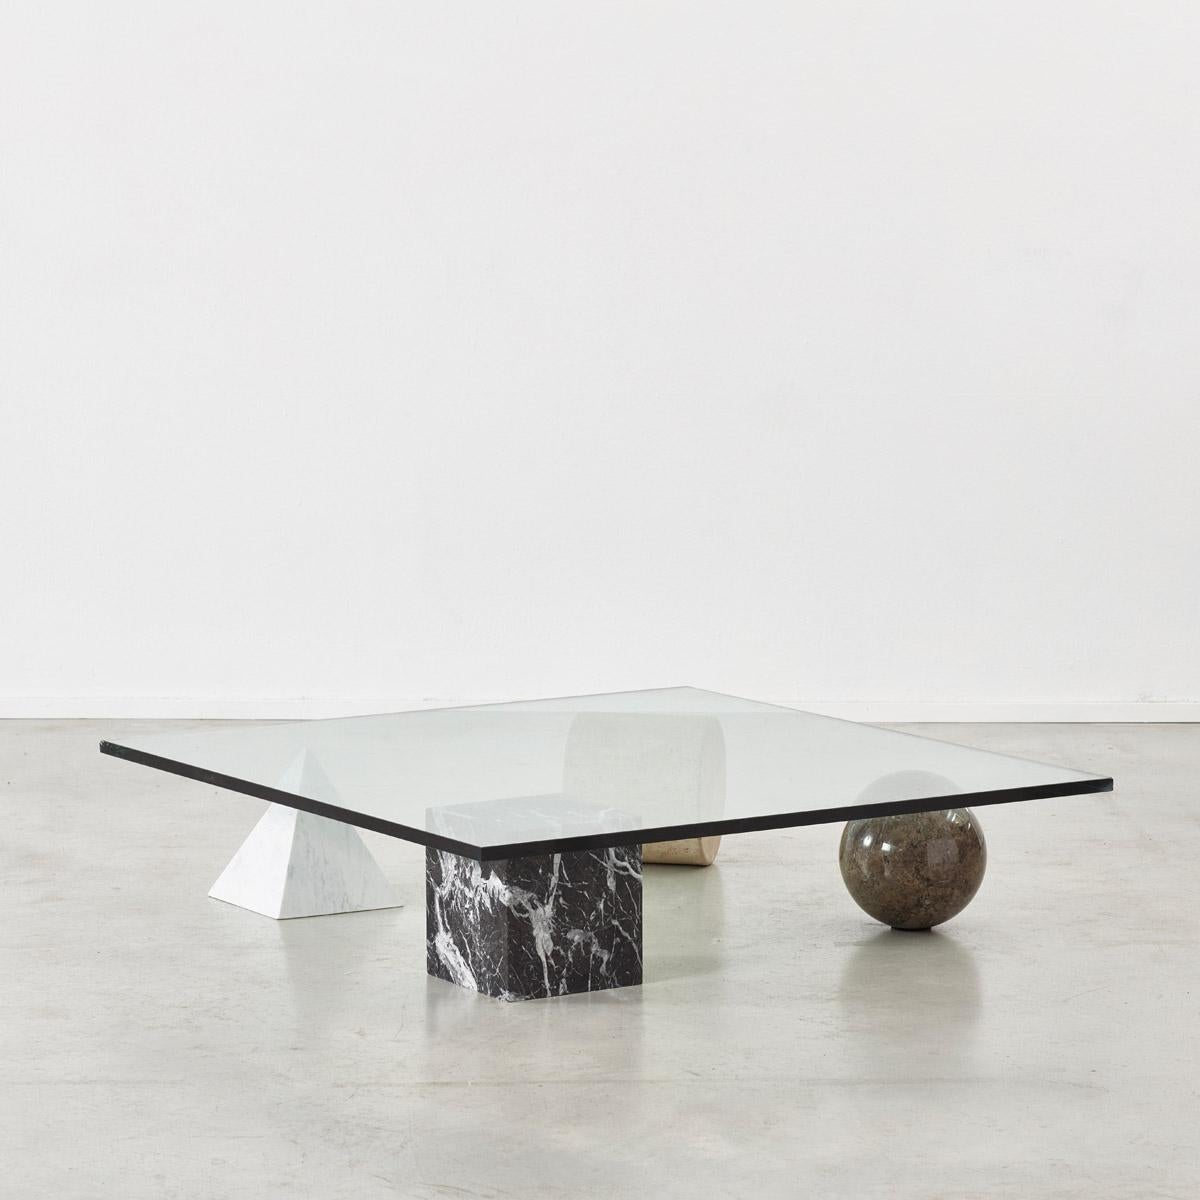 A stunning and sculptural Metafora coffee table designed by Lella and Massimo Vignelli. Inspired by the four forms of Euclidean geometry, the cube, the pyramid, the cylinder and the sphere, the four elements can be positioned freely for a unique